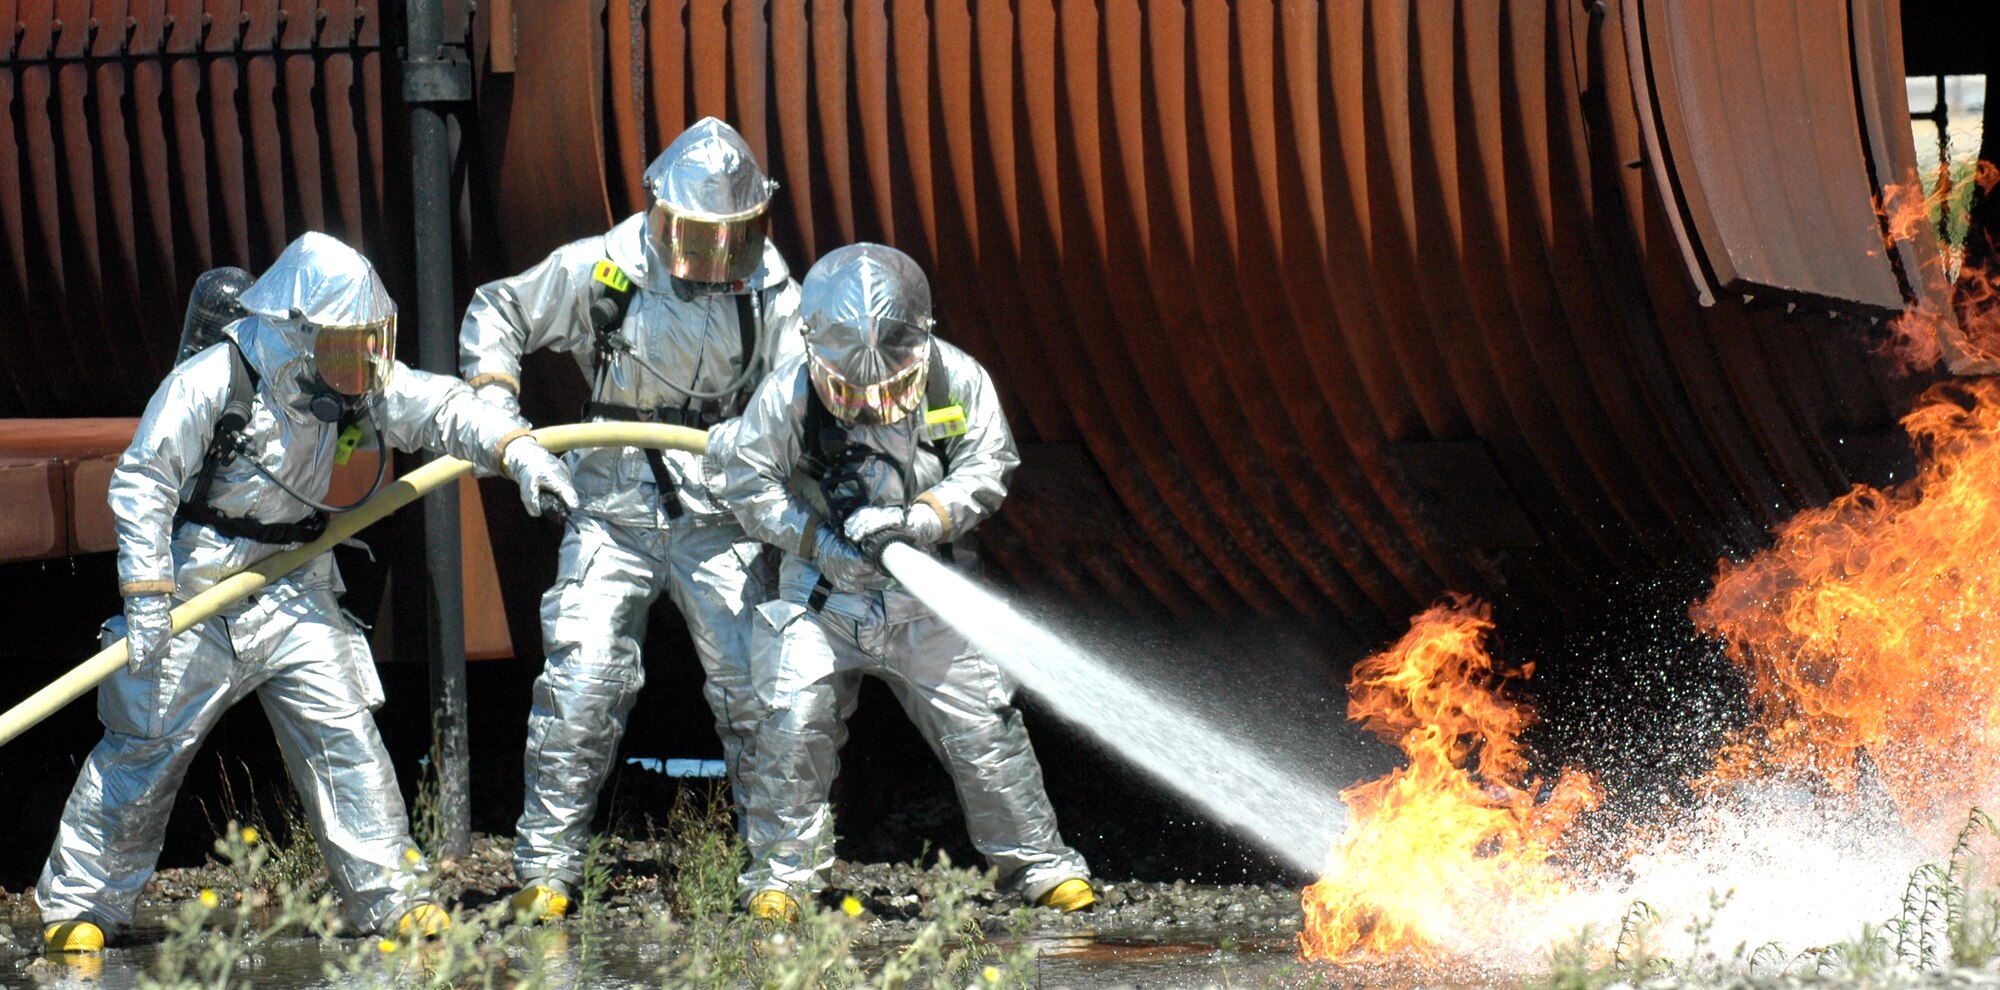 Travis firefighters hose down flames outside of aircraft mock-up July 19. The mock-up is equipped with propane gas nozzles installed in and around it to create flames. (U.S. Air Force photo/Staff Sgt. Matthew McGovern)